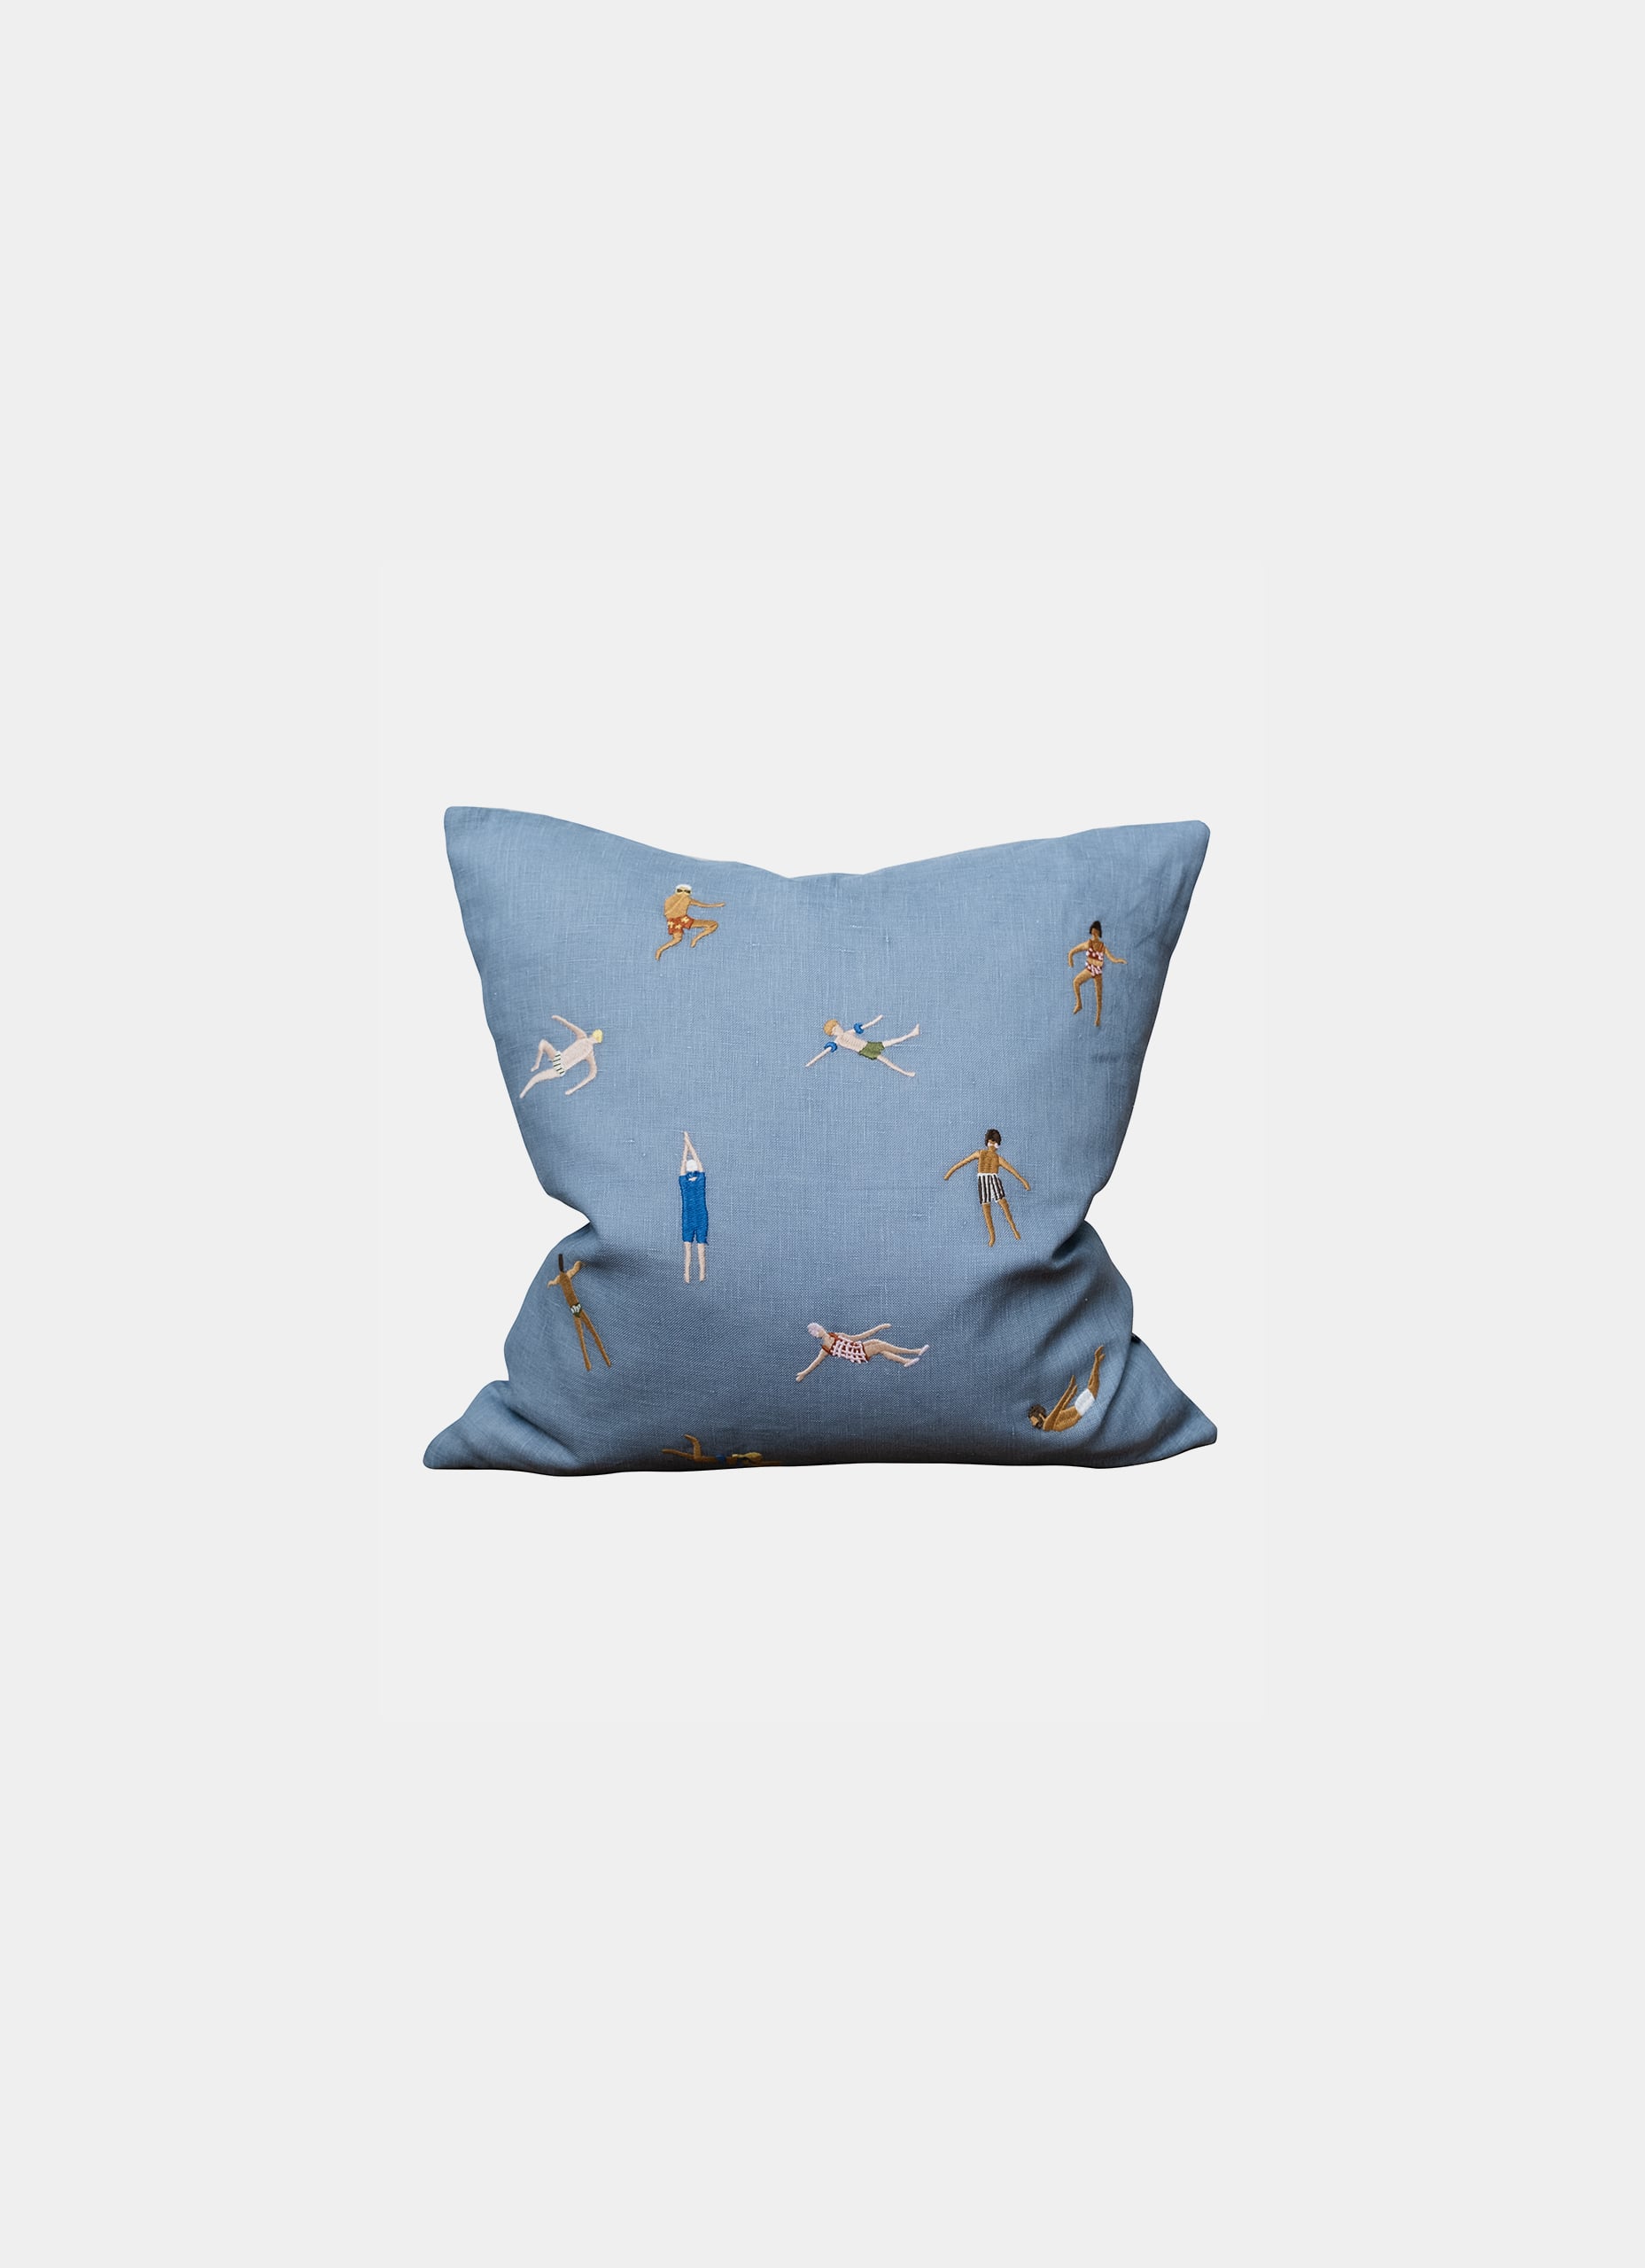 Fine Little Day - Swimmers - Embroidered Cushion - Linen and Cotton - Blue edition